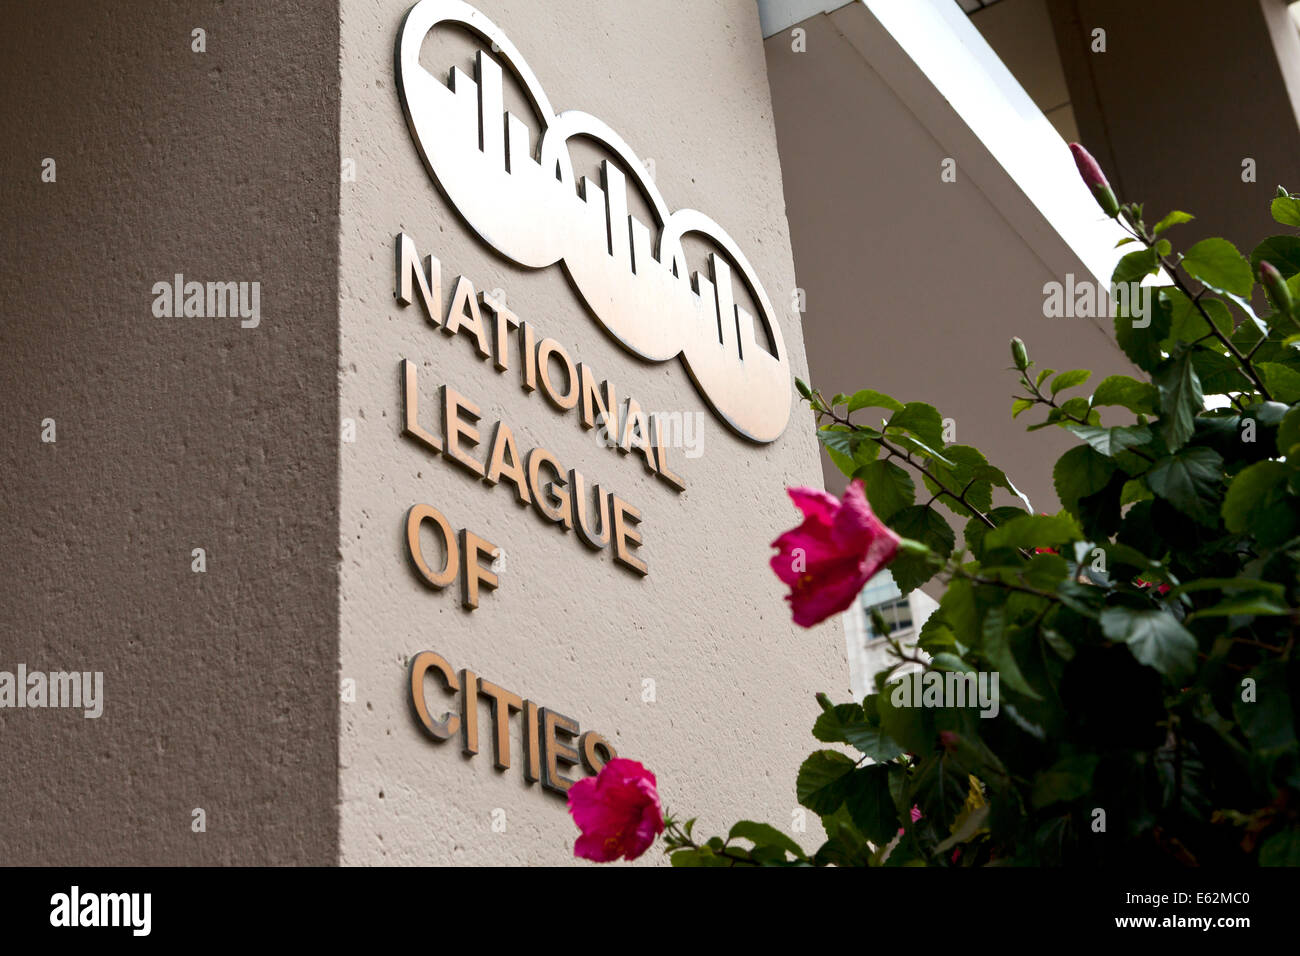 National League of Cities building sign - Washington, DC USA Banque D'Images